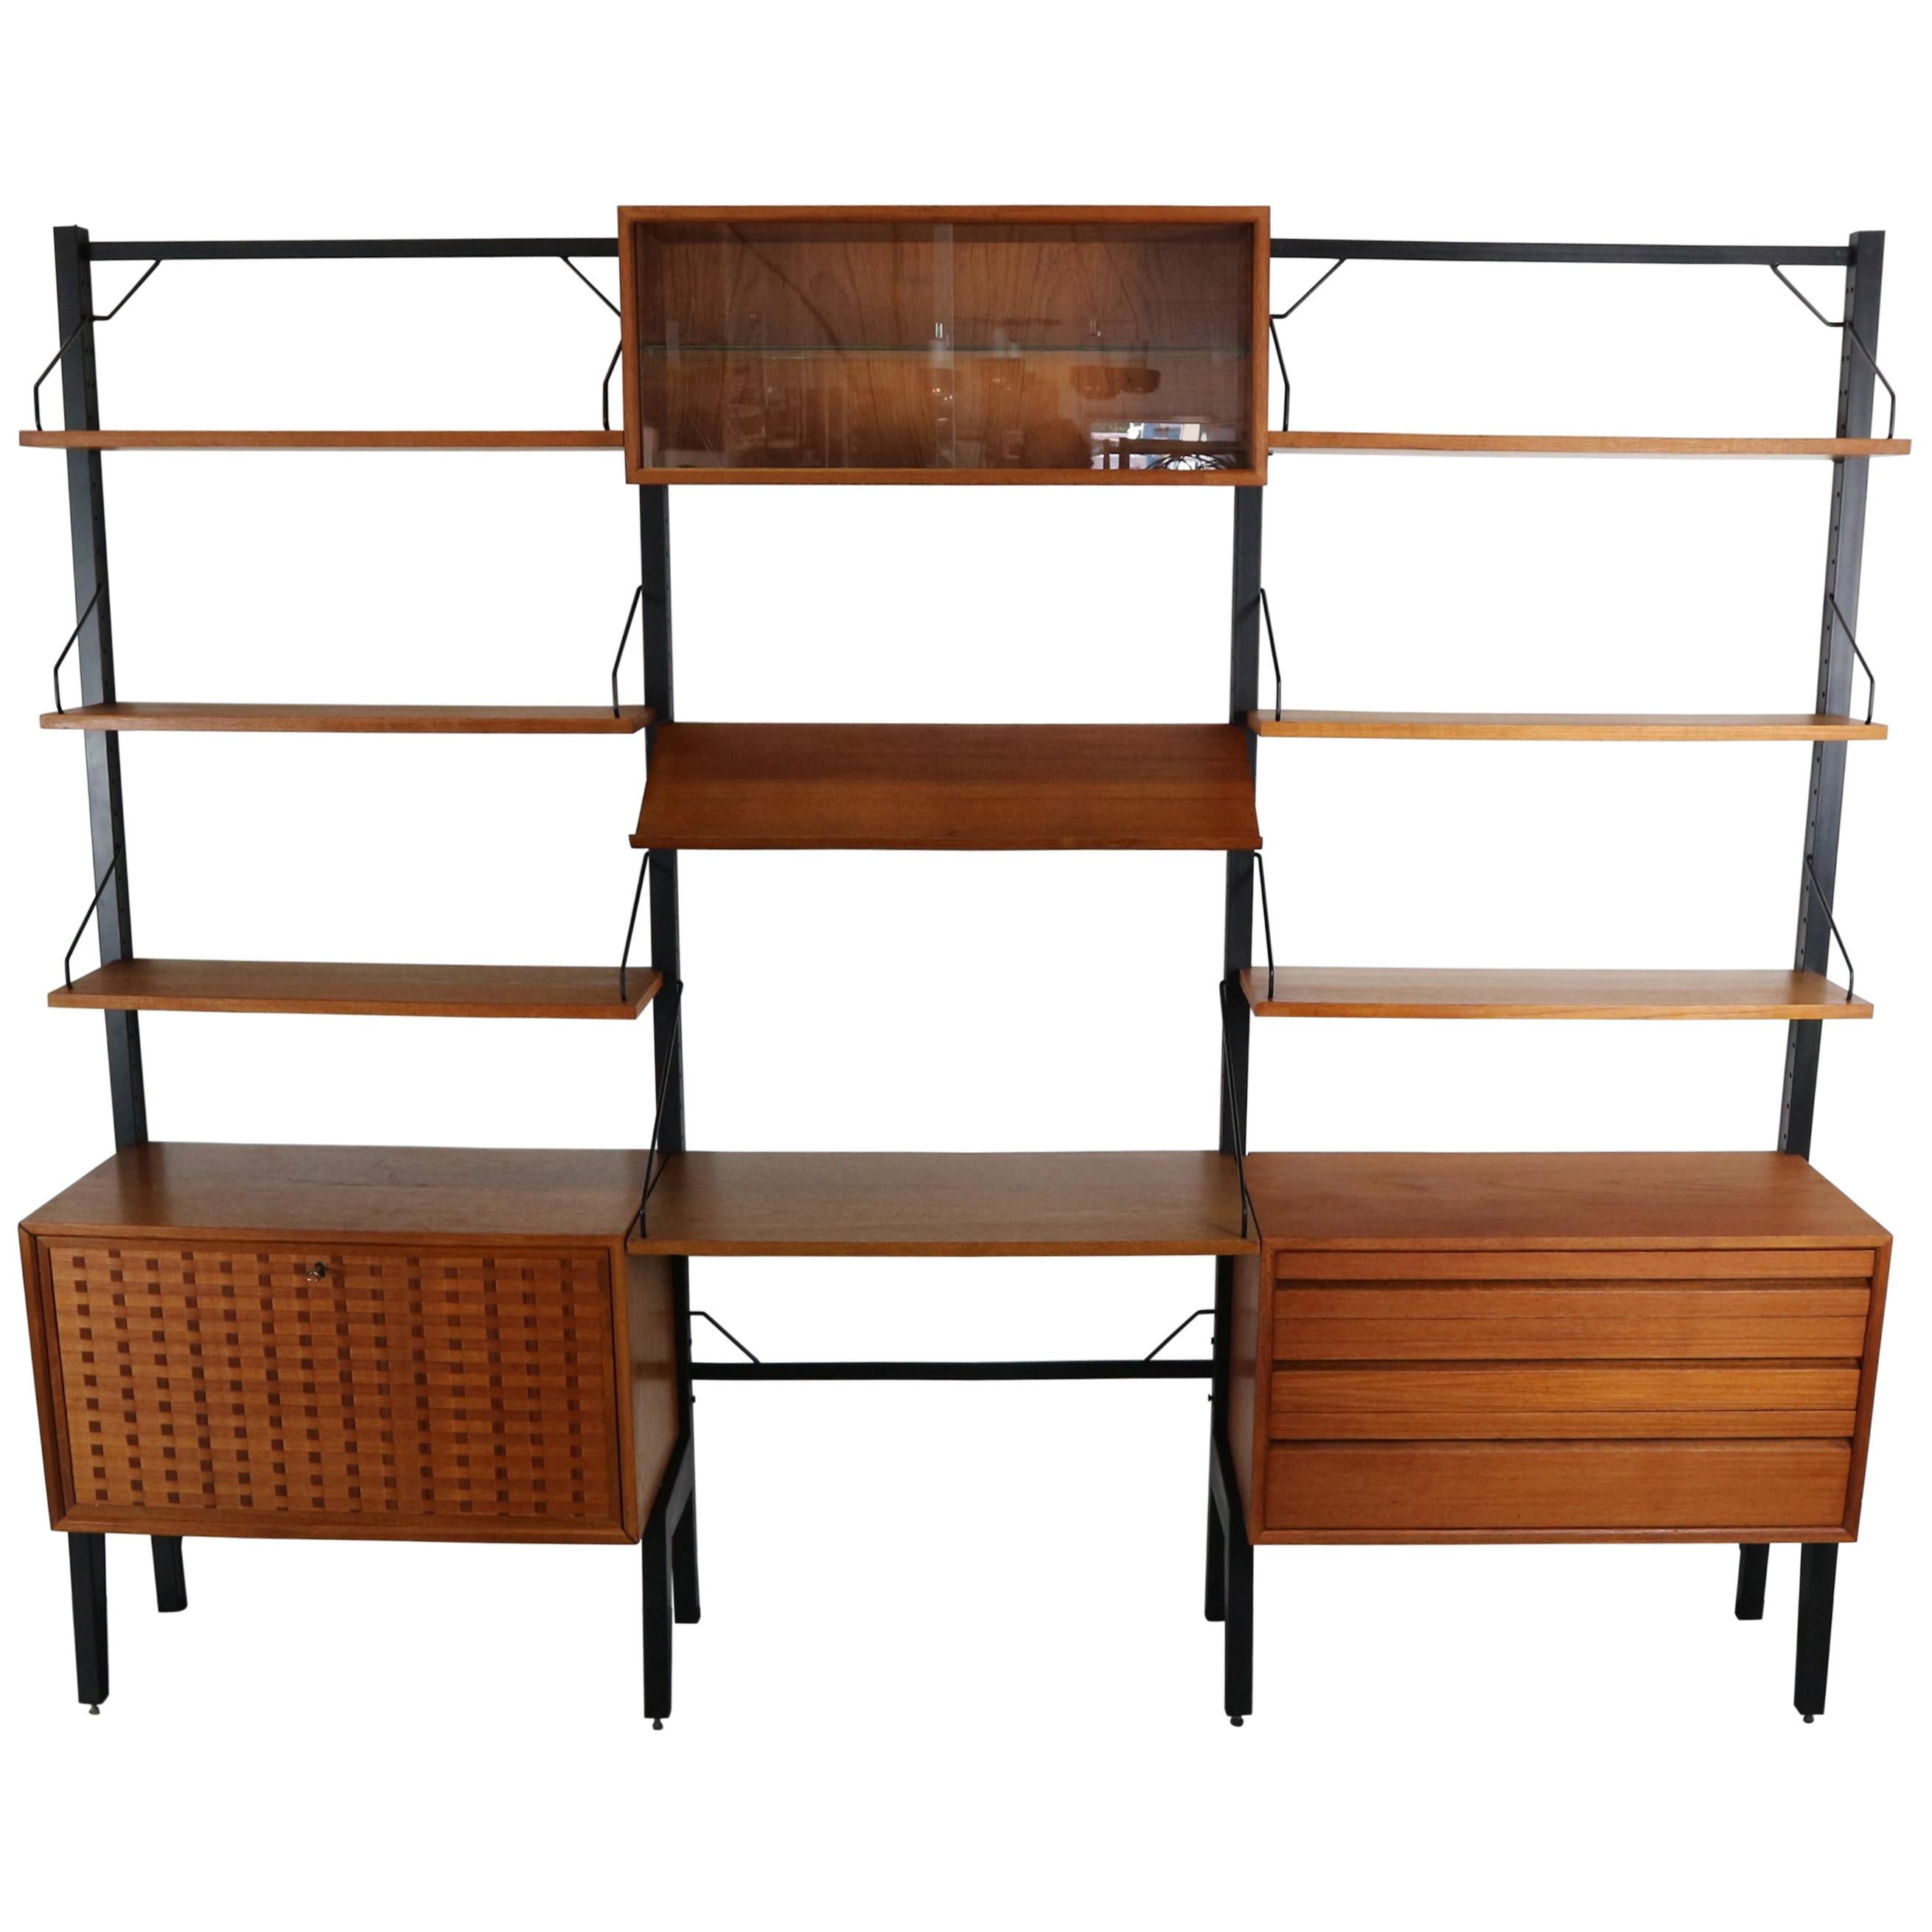 Vintage Royal System Modular free standing Wall Unit by Poul Cadovius for Cado